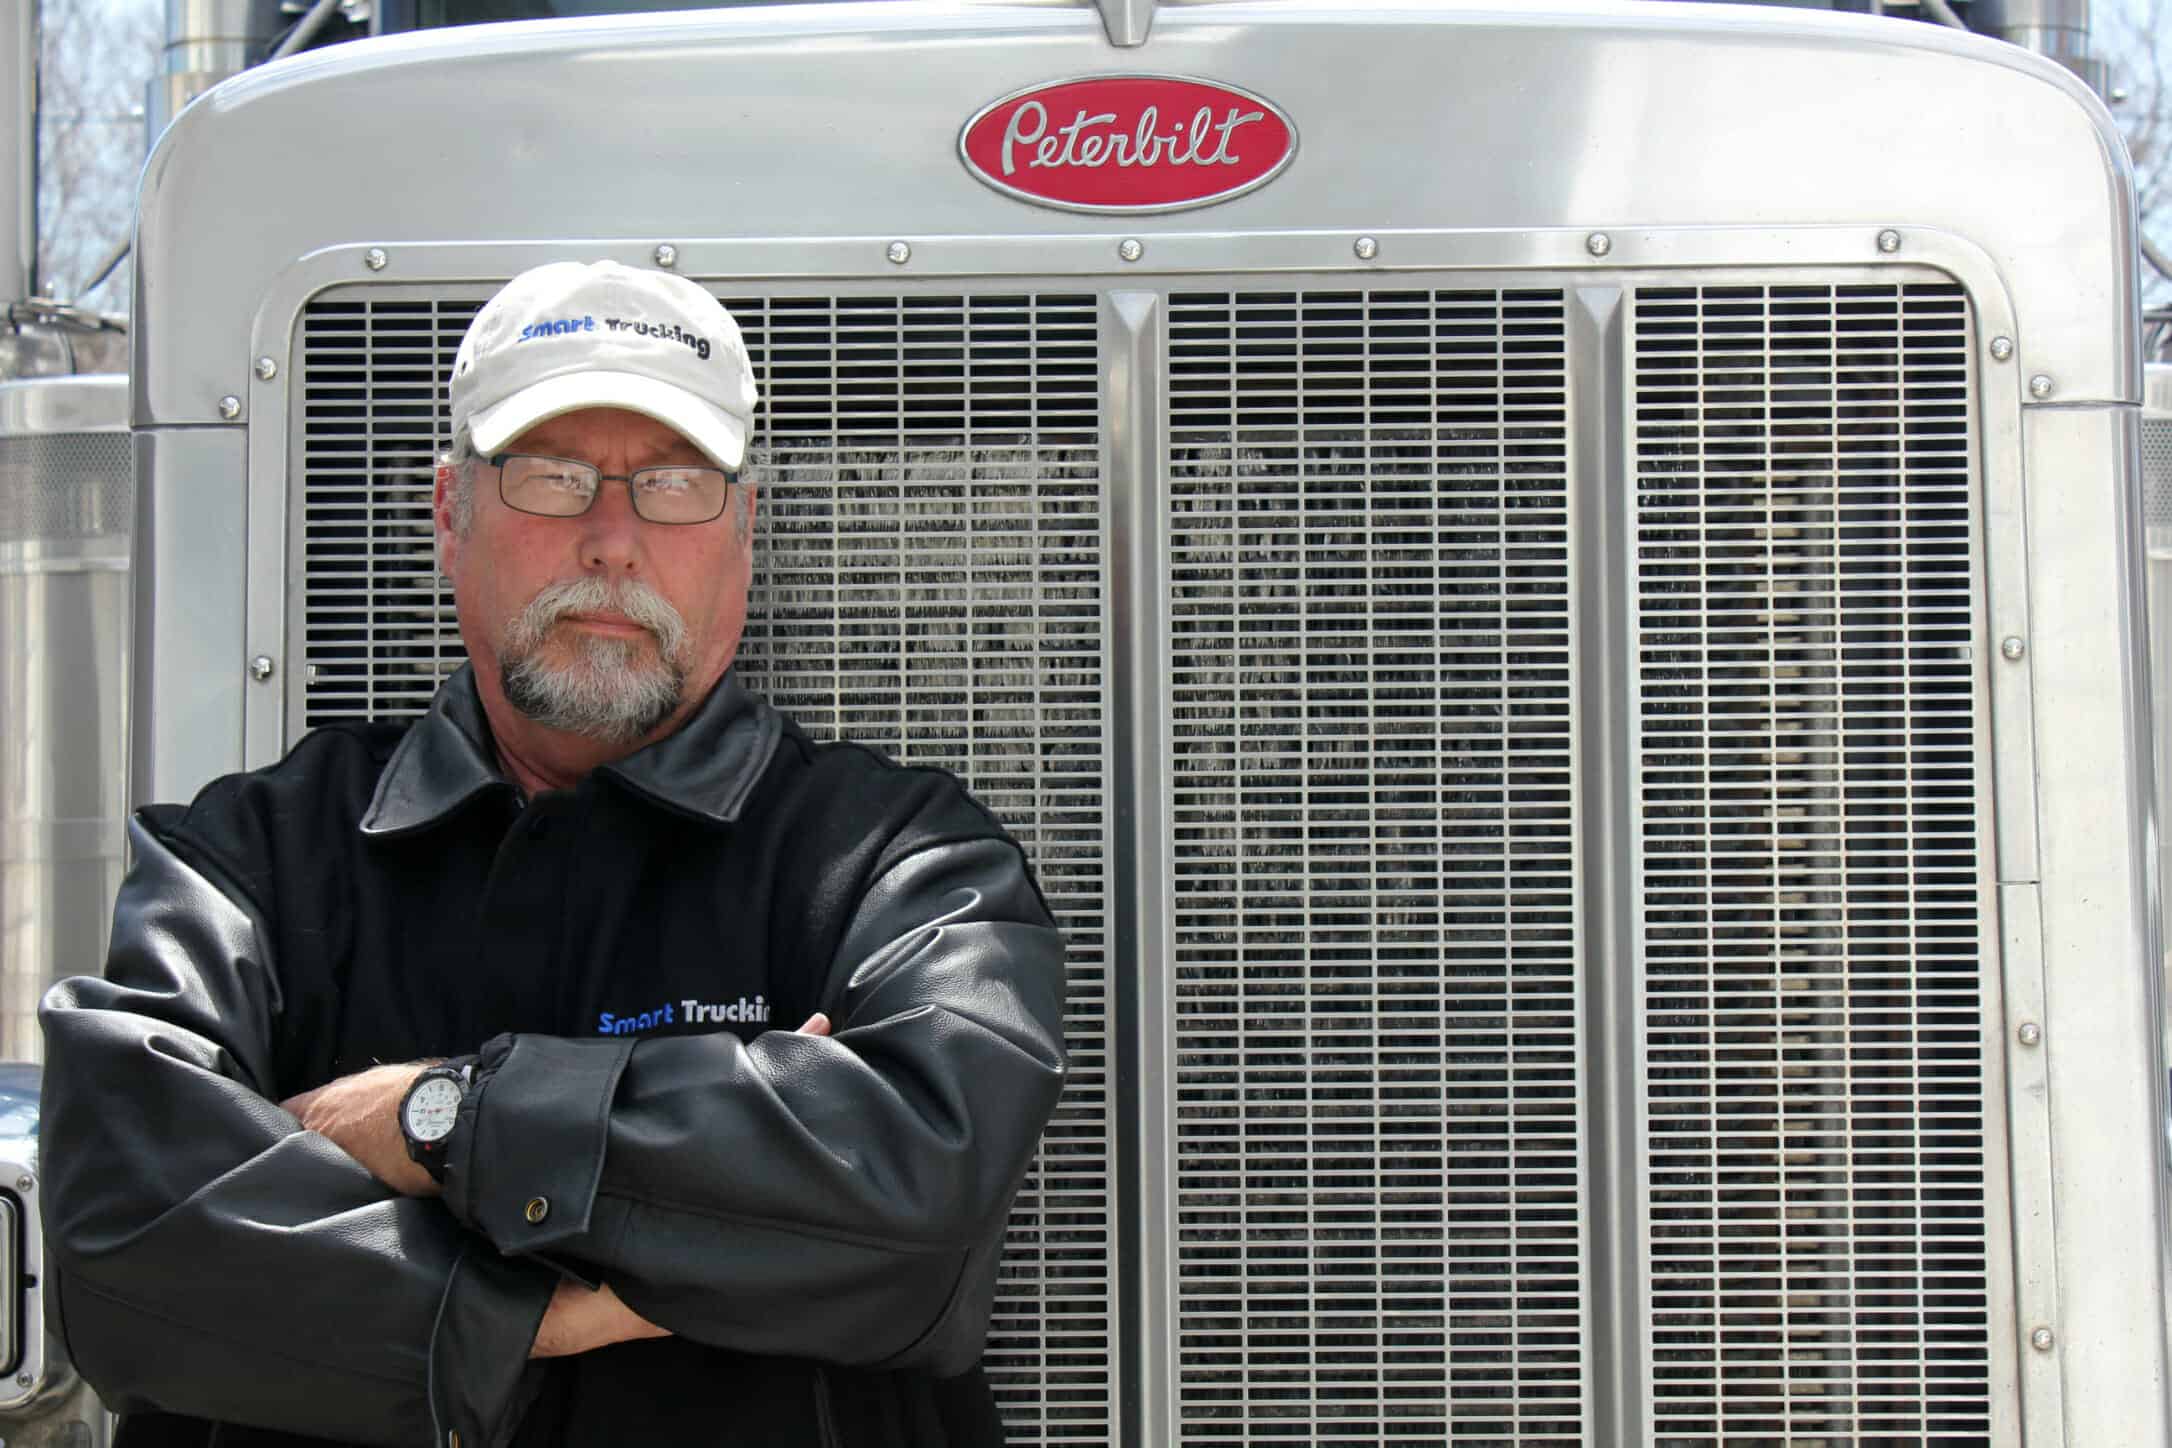 7 Things You Need to Know About Your First Year as a New Truck Driver